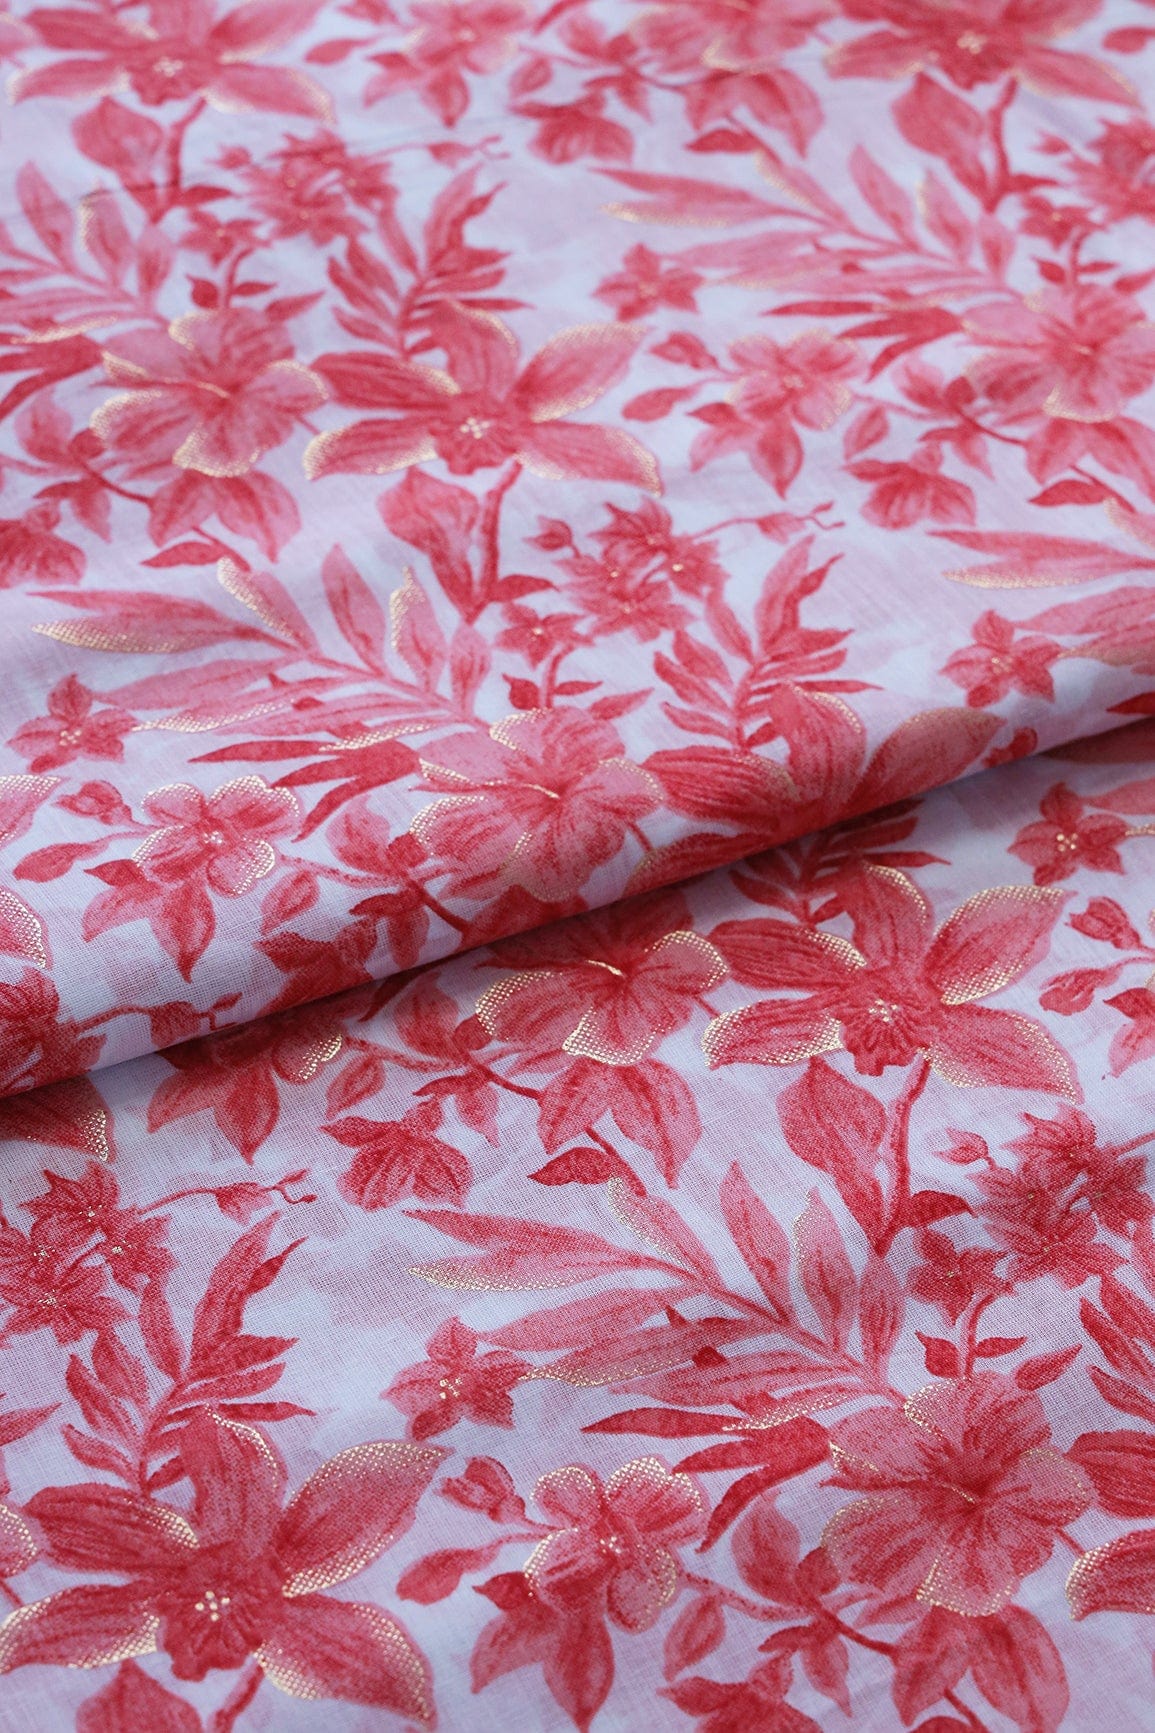 doeraa Prints Peach Floral With Foil Print On White Pure Mul Cotton Fabric